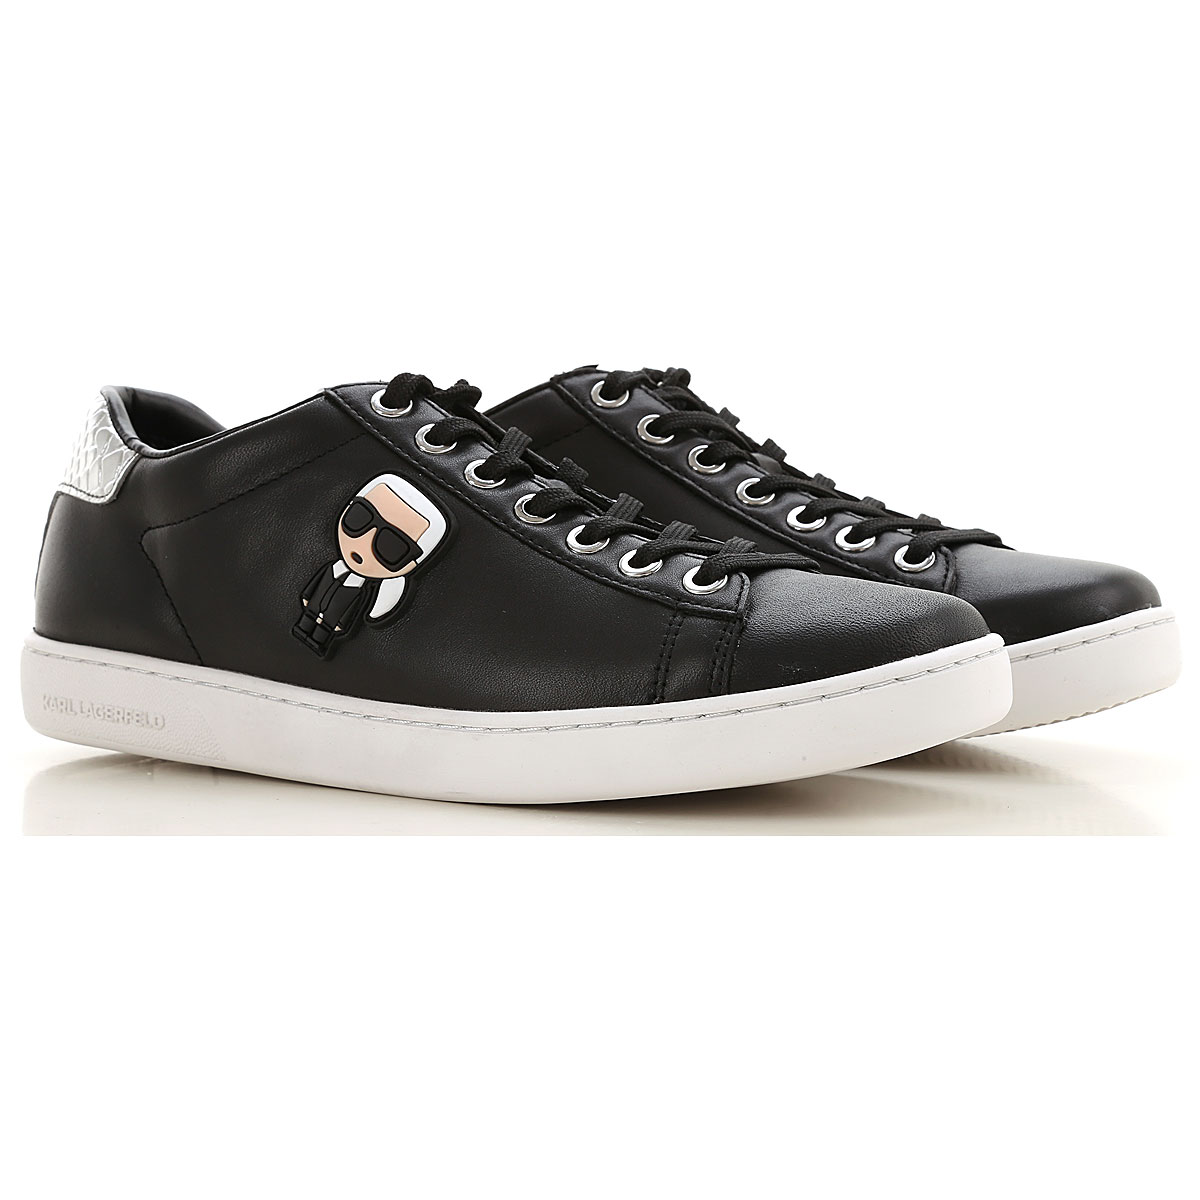 Womens Shoes Karl Lagerfeld, Style code: kl61230-000-black